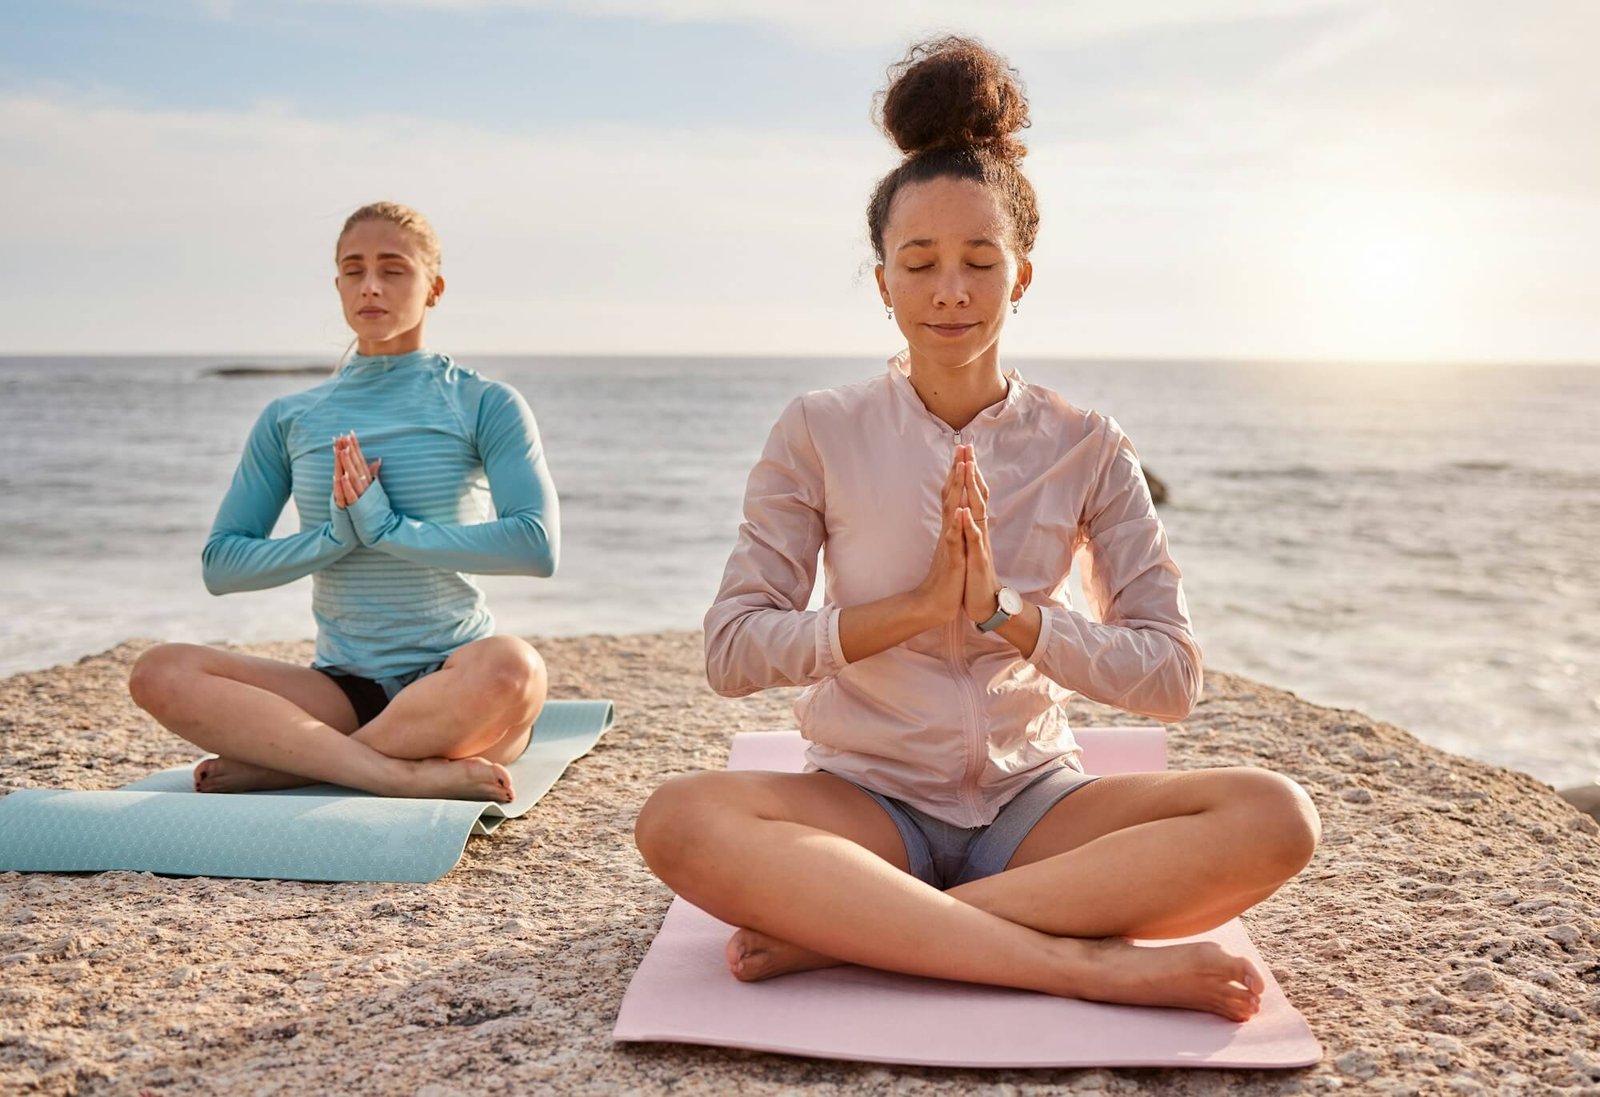 yoga-meditation-and-friends-outdoor-on-a-beach-together-for-mental-health-or-wellness-in-summer-e.jpg